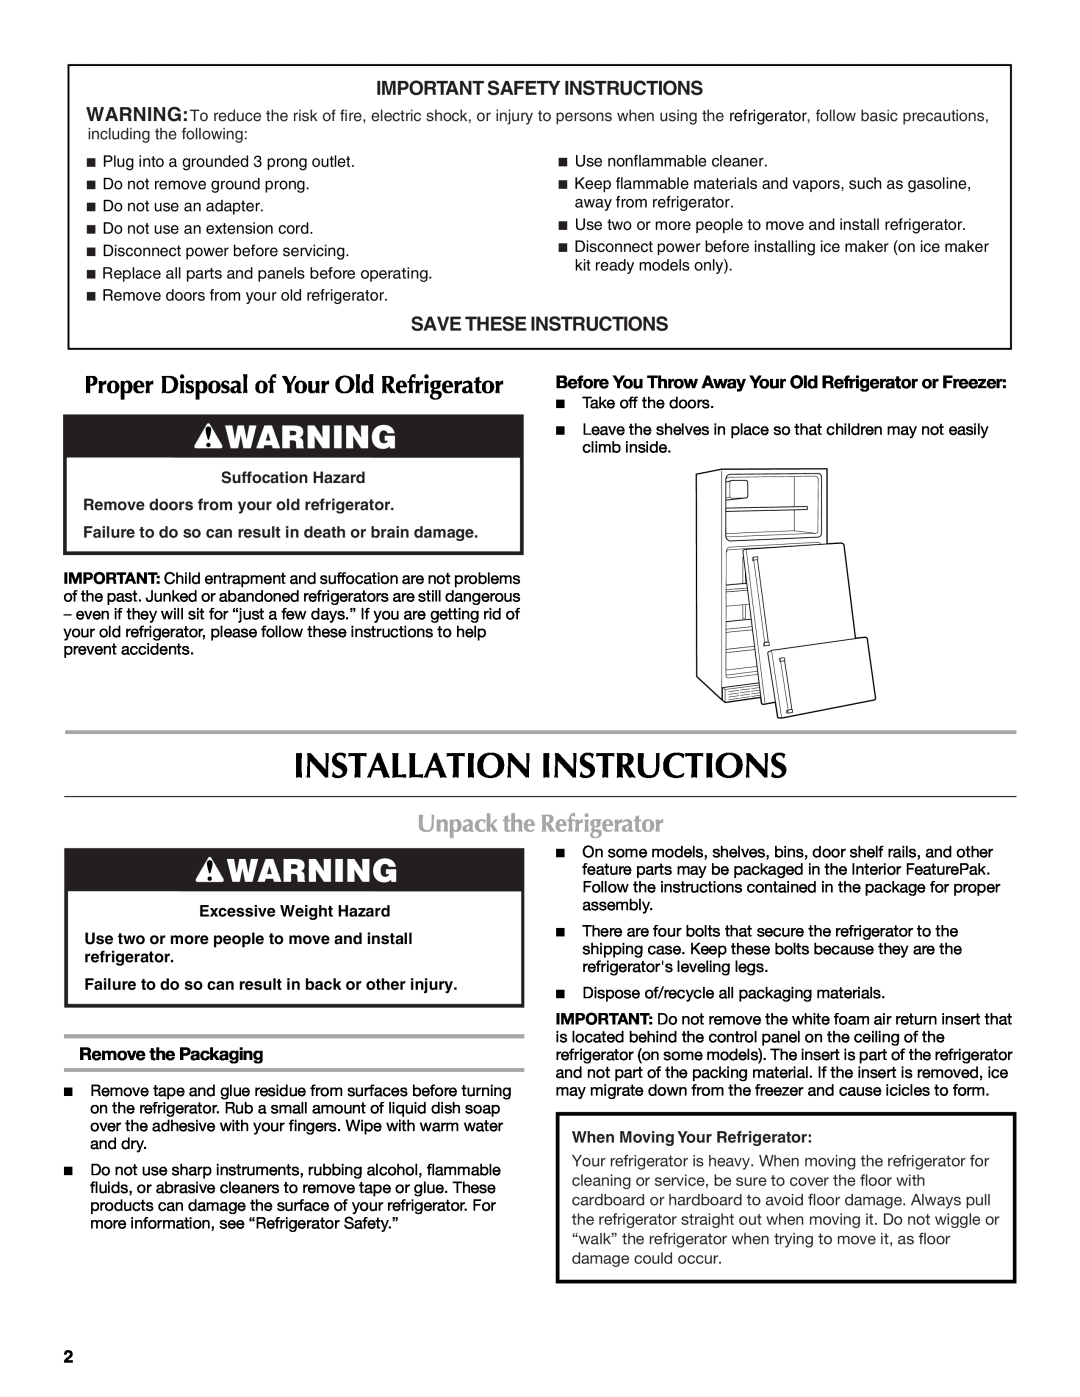 Maytag M8RXEGMXS Installation Instructions, Unpack the Refrigerator, Important Safety Instructions, Remove the Packaging 